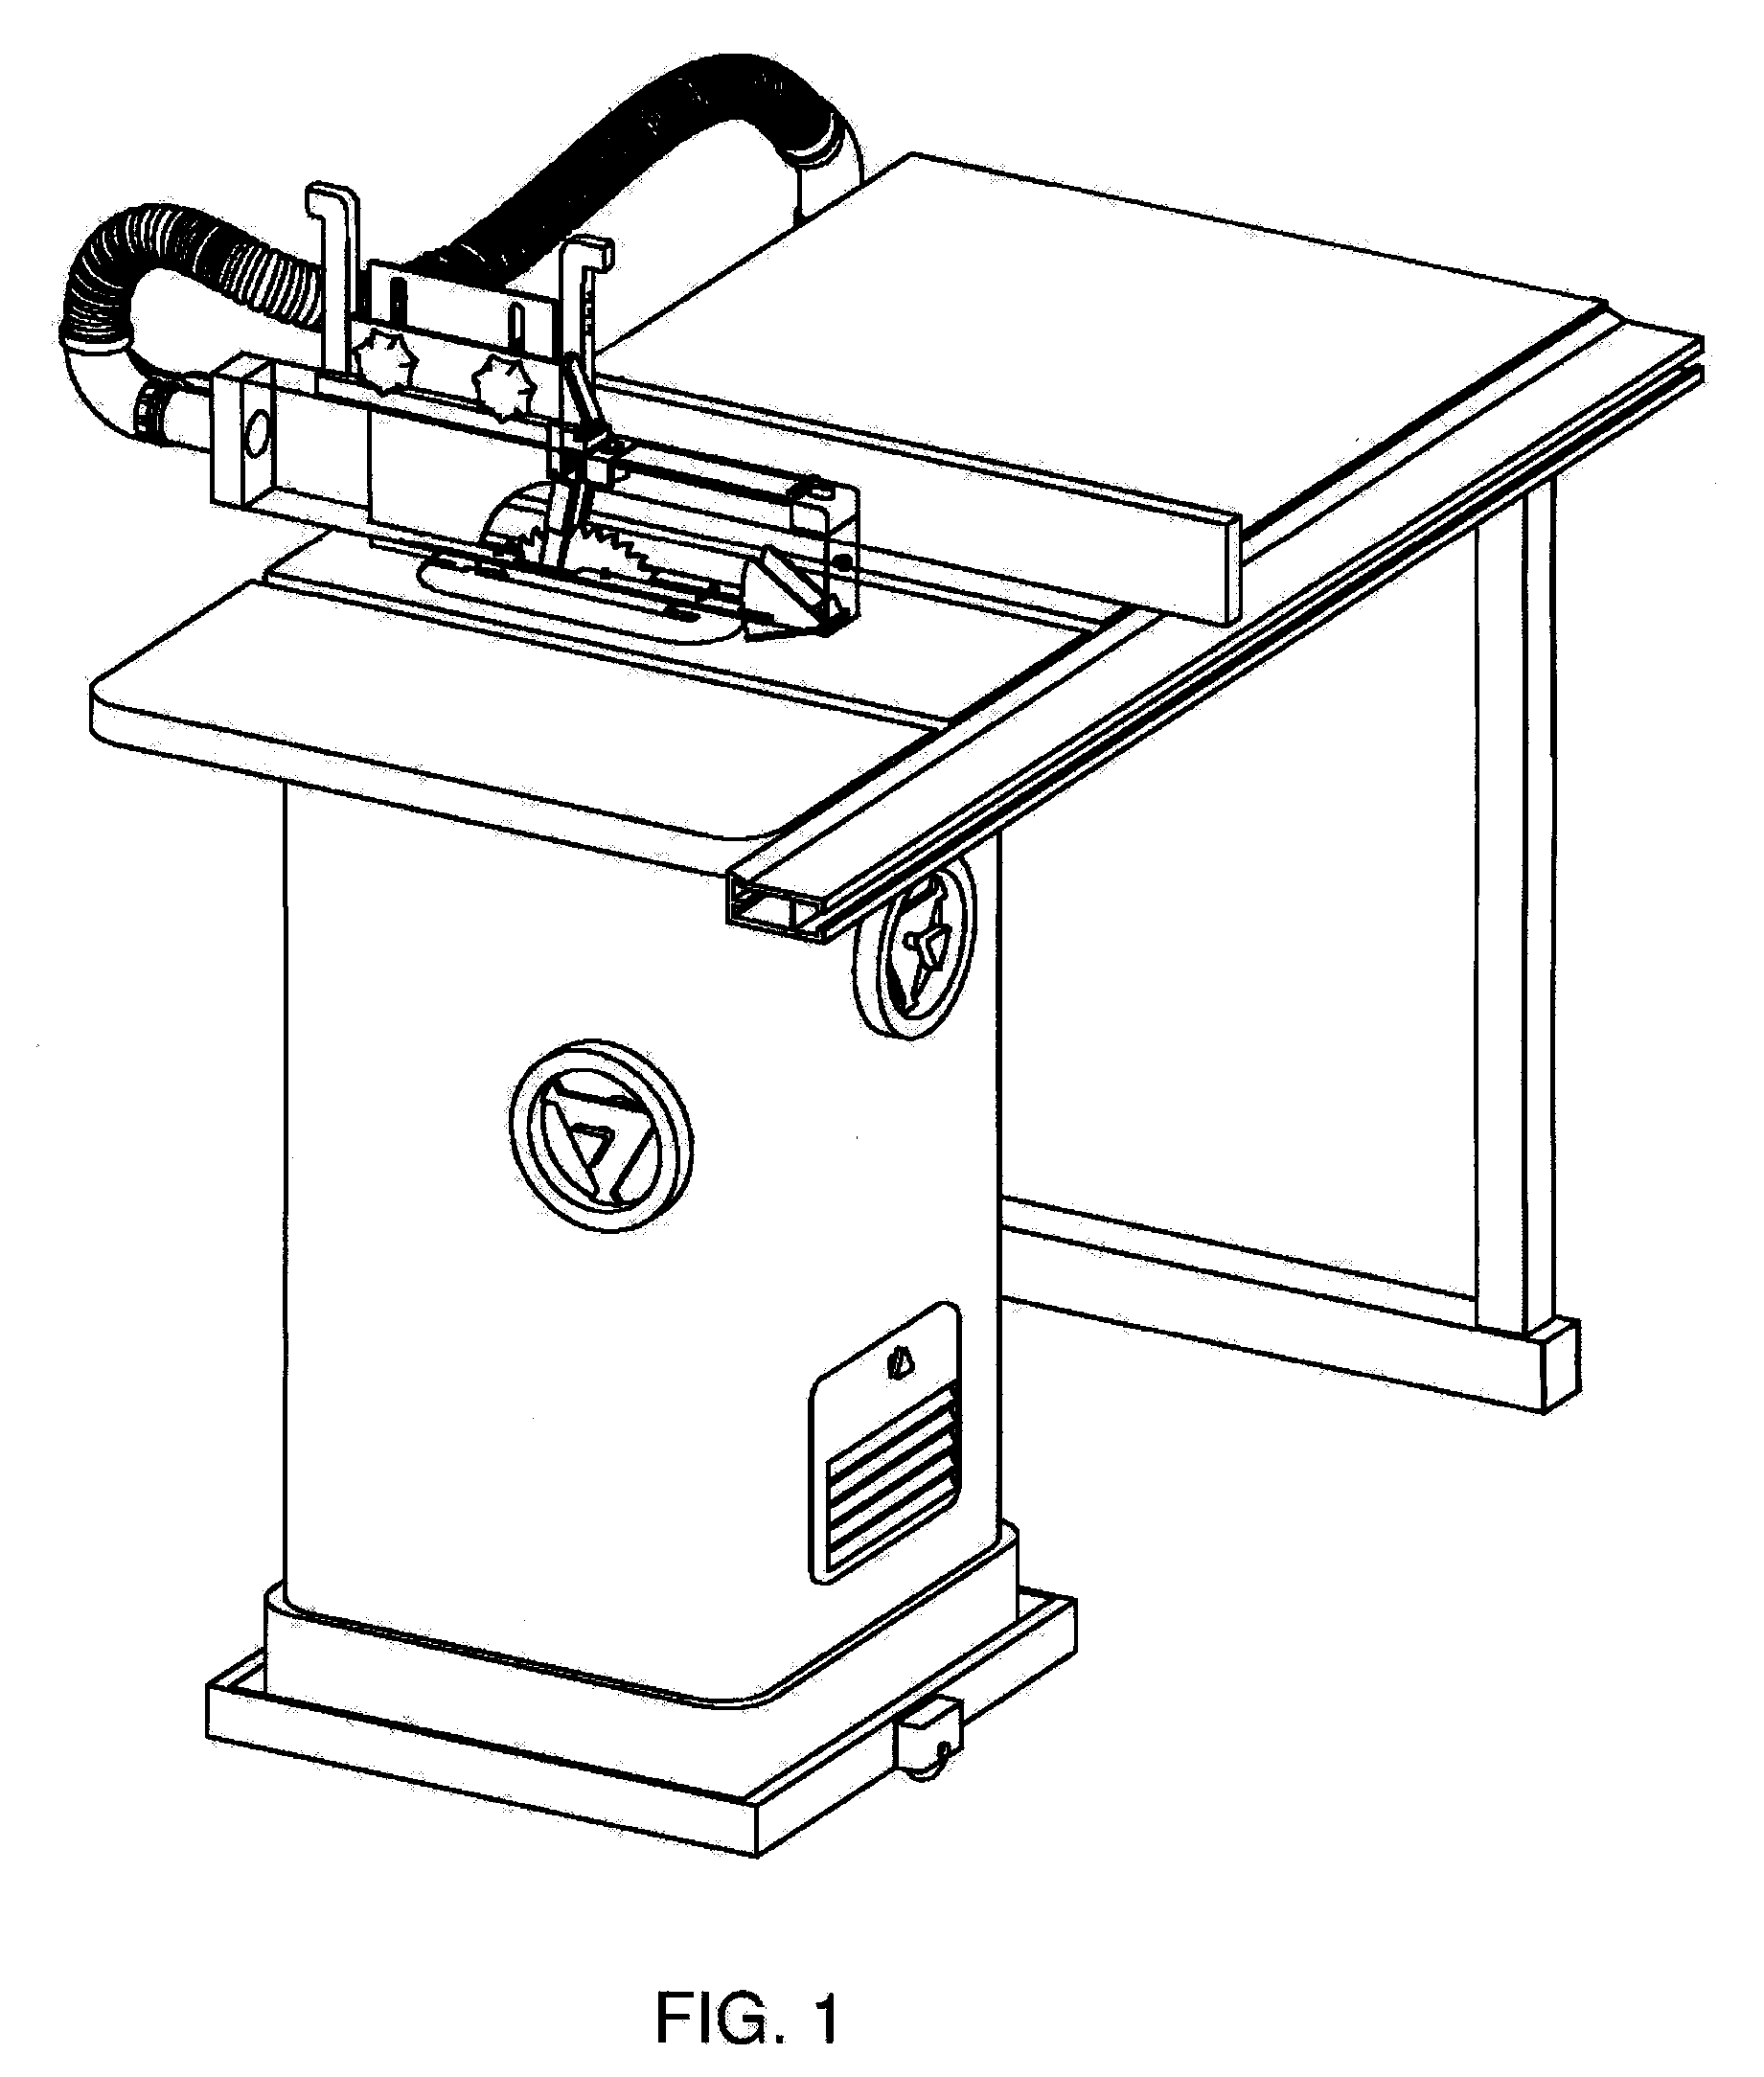 Health and safety system for a table saw